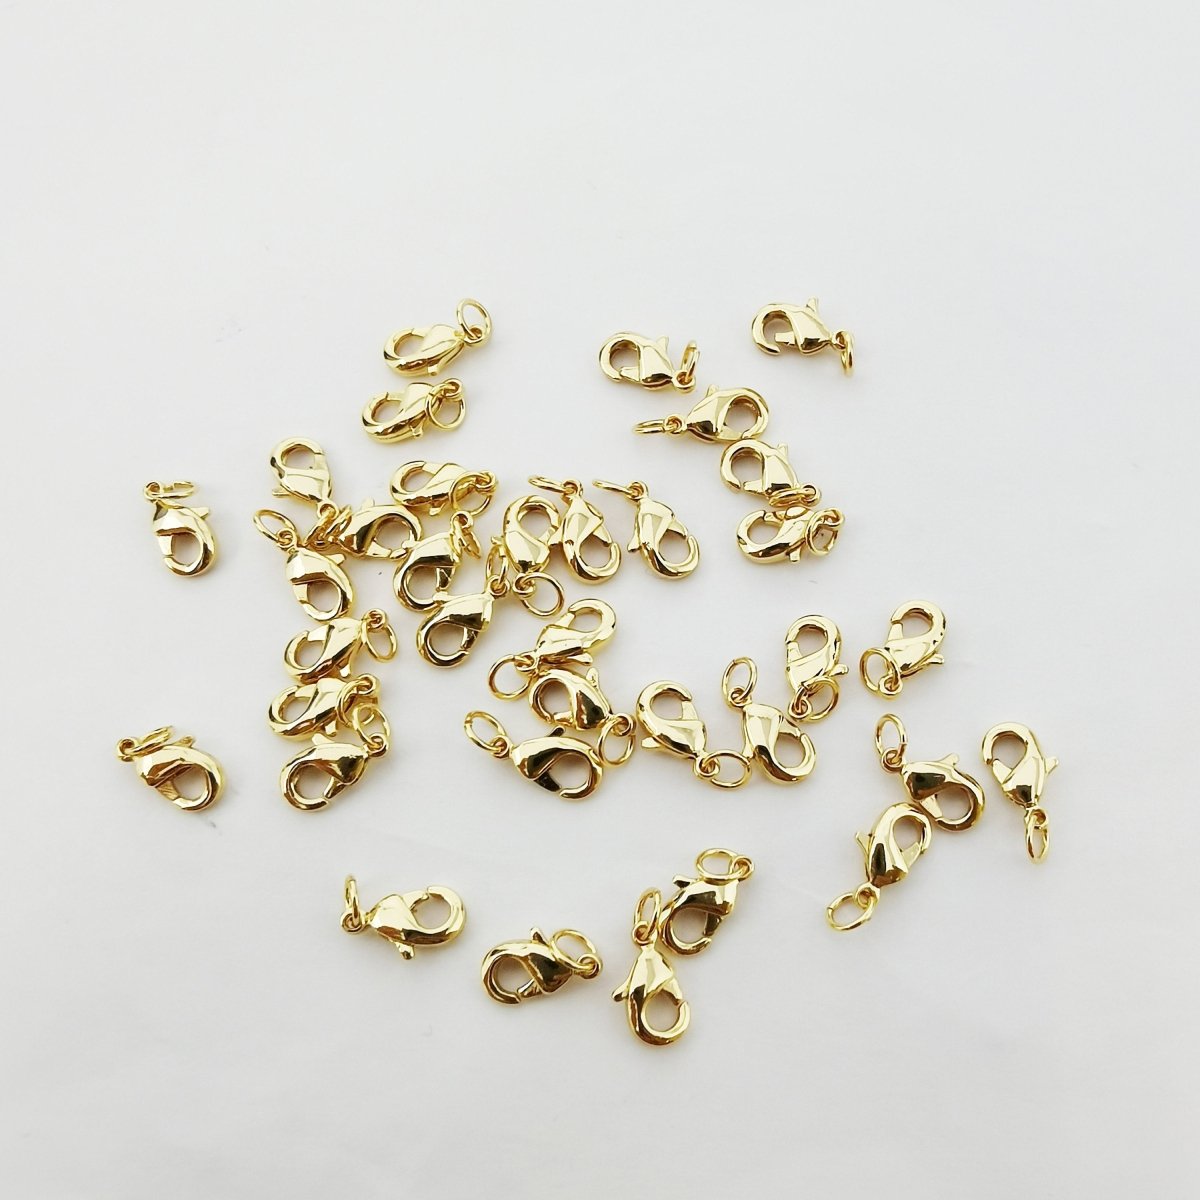 5x10mm Thick 14k Gold Plated Lobster Claw Clasp Gold Clasp for Necklace Bracelet jewelry making supply lead,nickel,tarnish free K-720 - DLUXCA